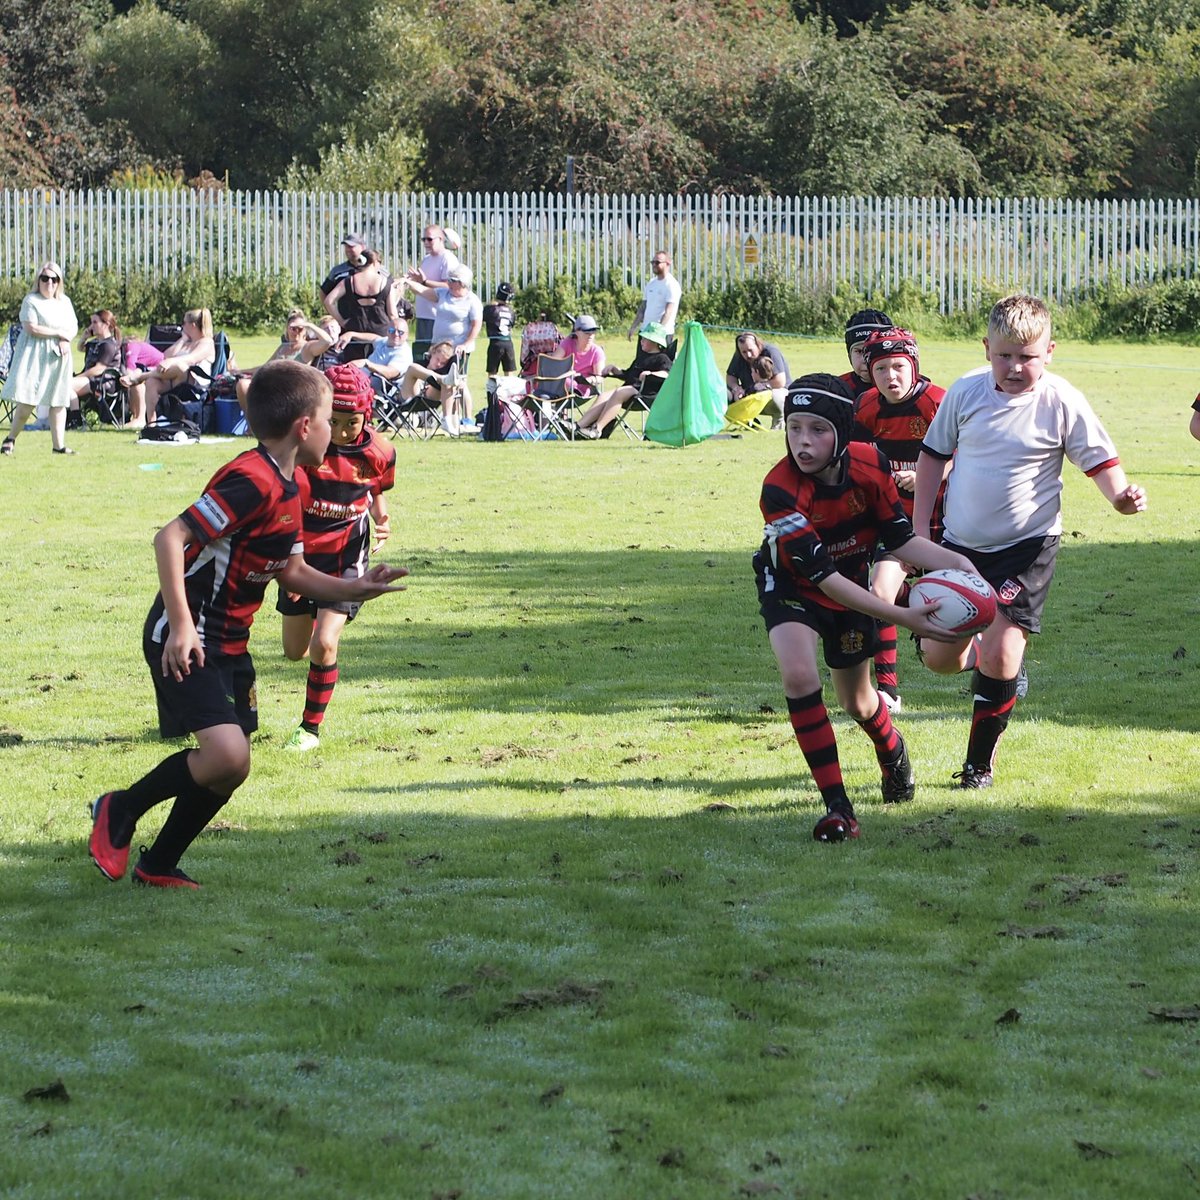 What a beautiful day for some great rugby 3 wins 1 loss and huge thanks to @aberdare who hosted a great festival. Plenty to work on but very encouraging to see the ball being thrown about! 👊🏻🇩🇪🐺

@07496Sdtay @Aceslock @AllWalesSport @CommunityOsprey @glynrfc